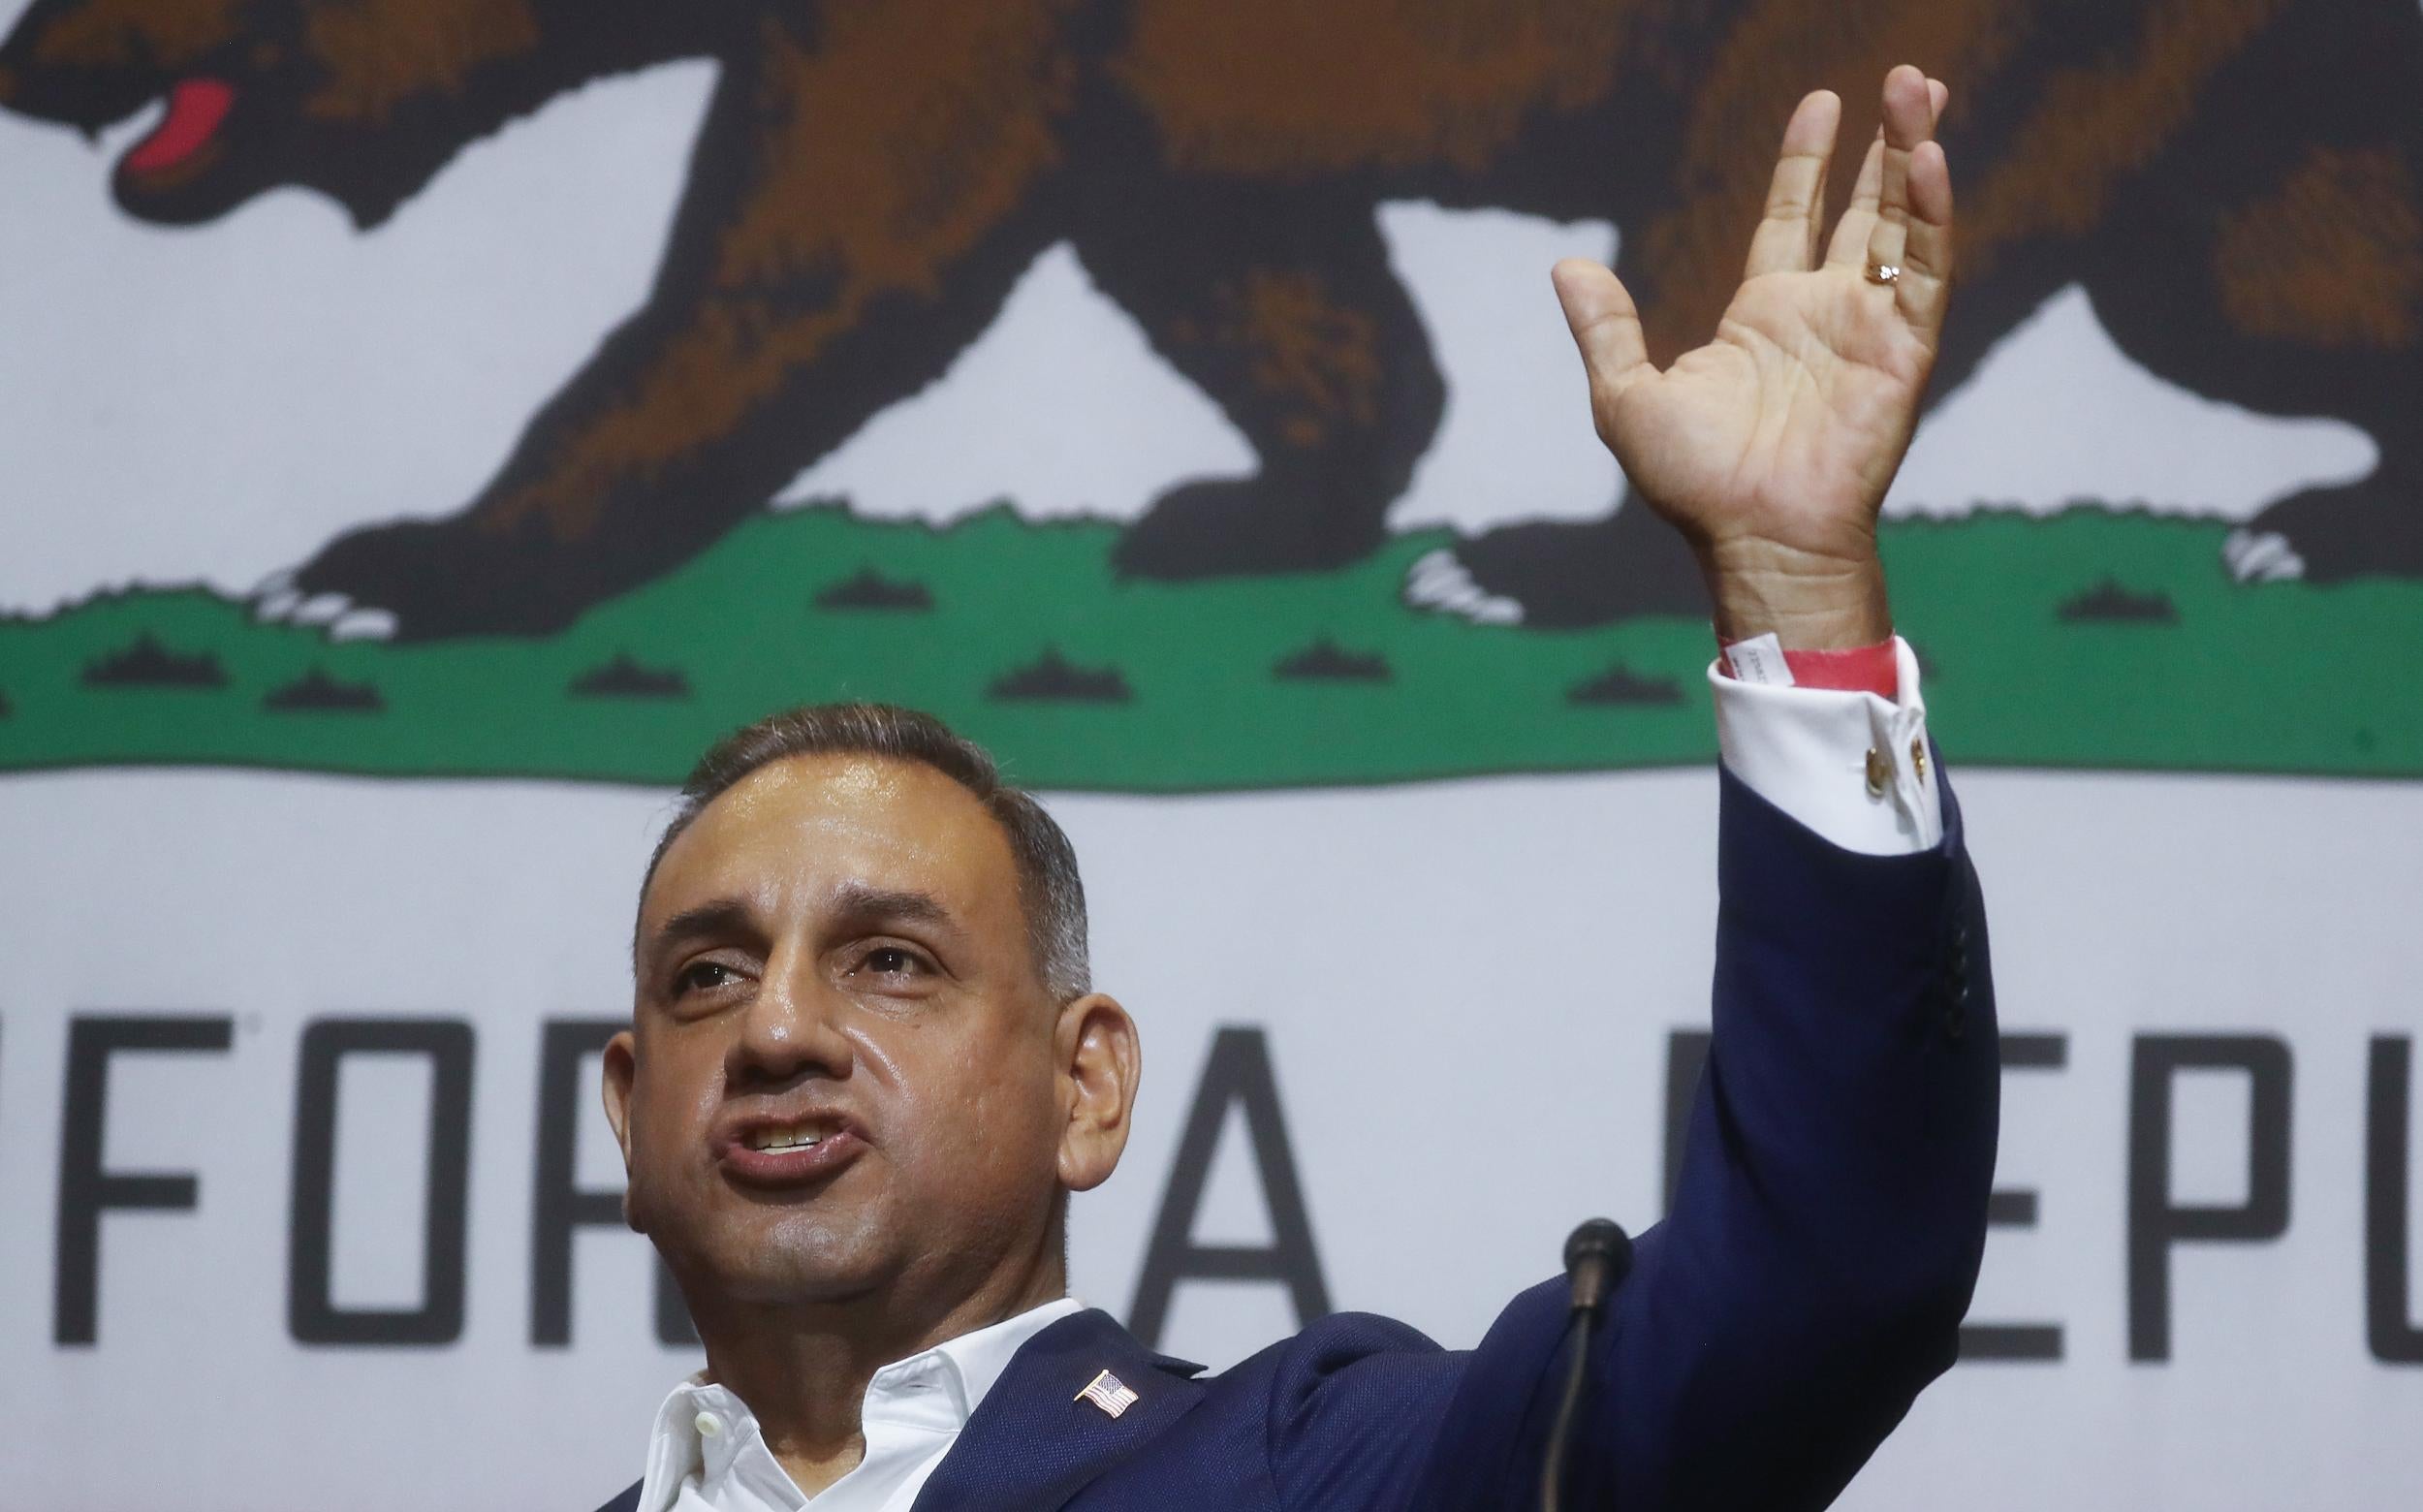 Democratic candidate Gil Cisneros, a former naval officer who ‘got lucky’